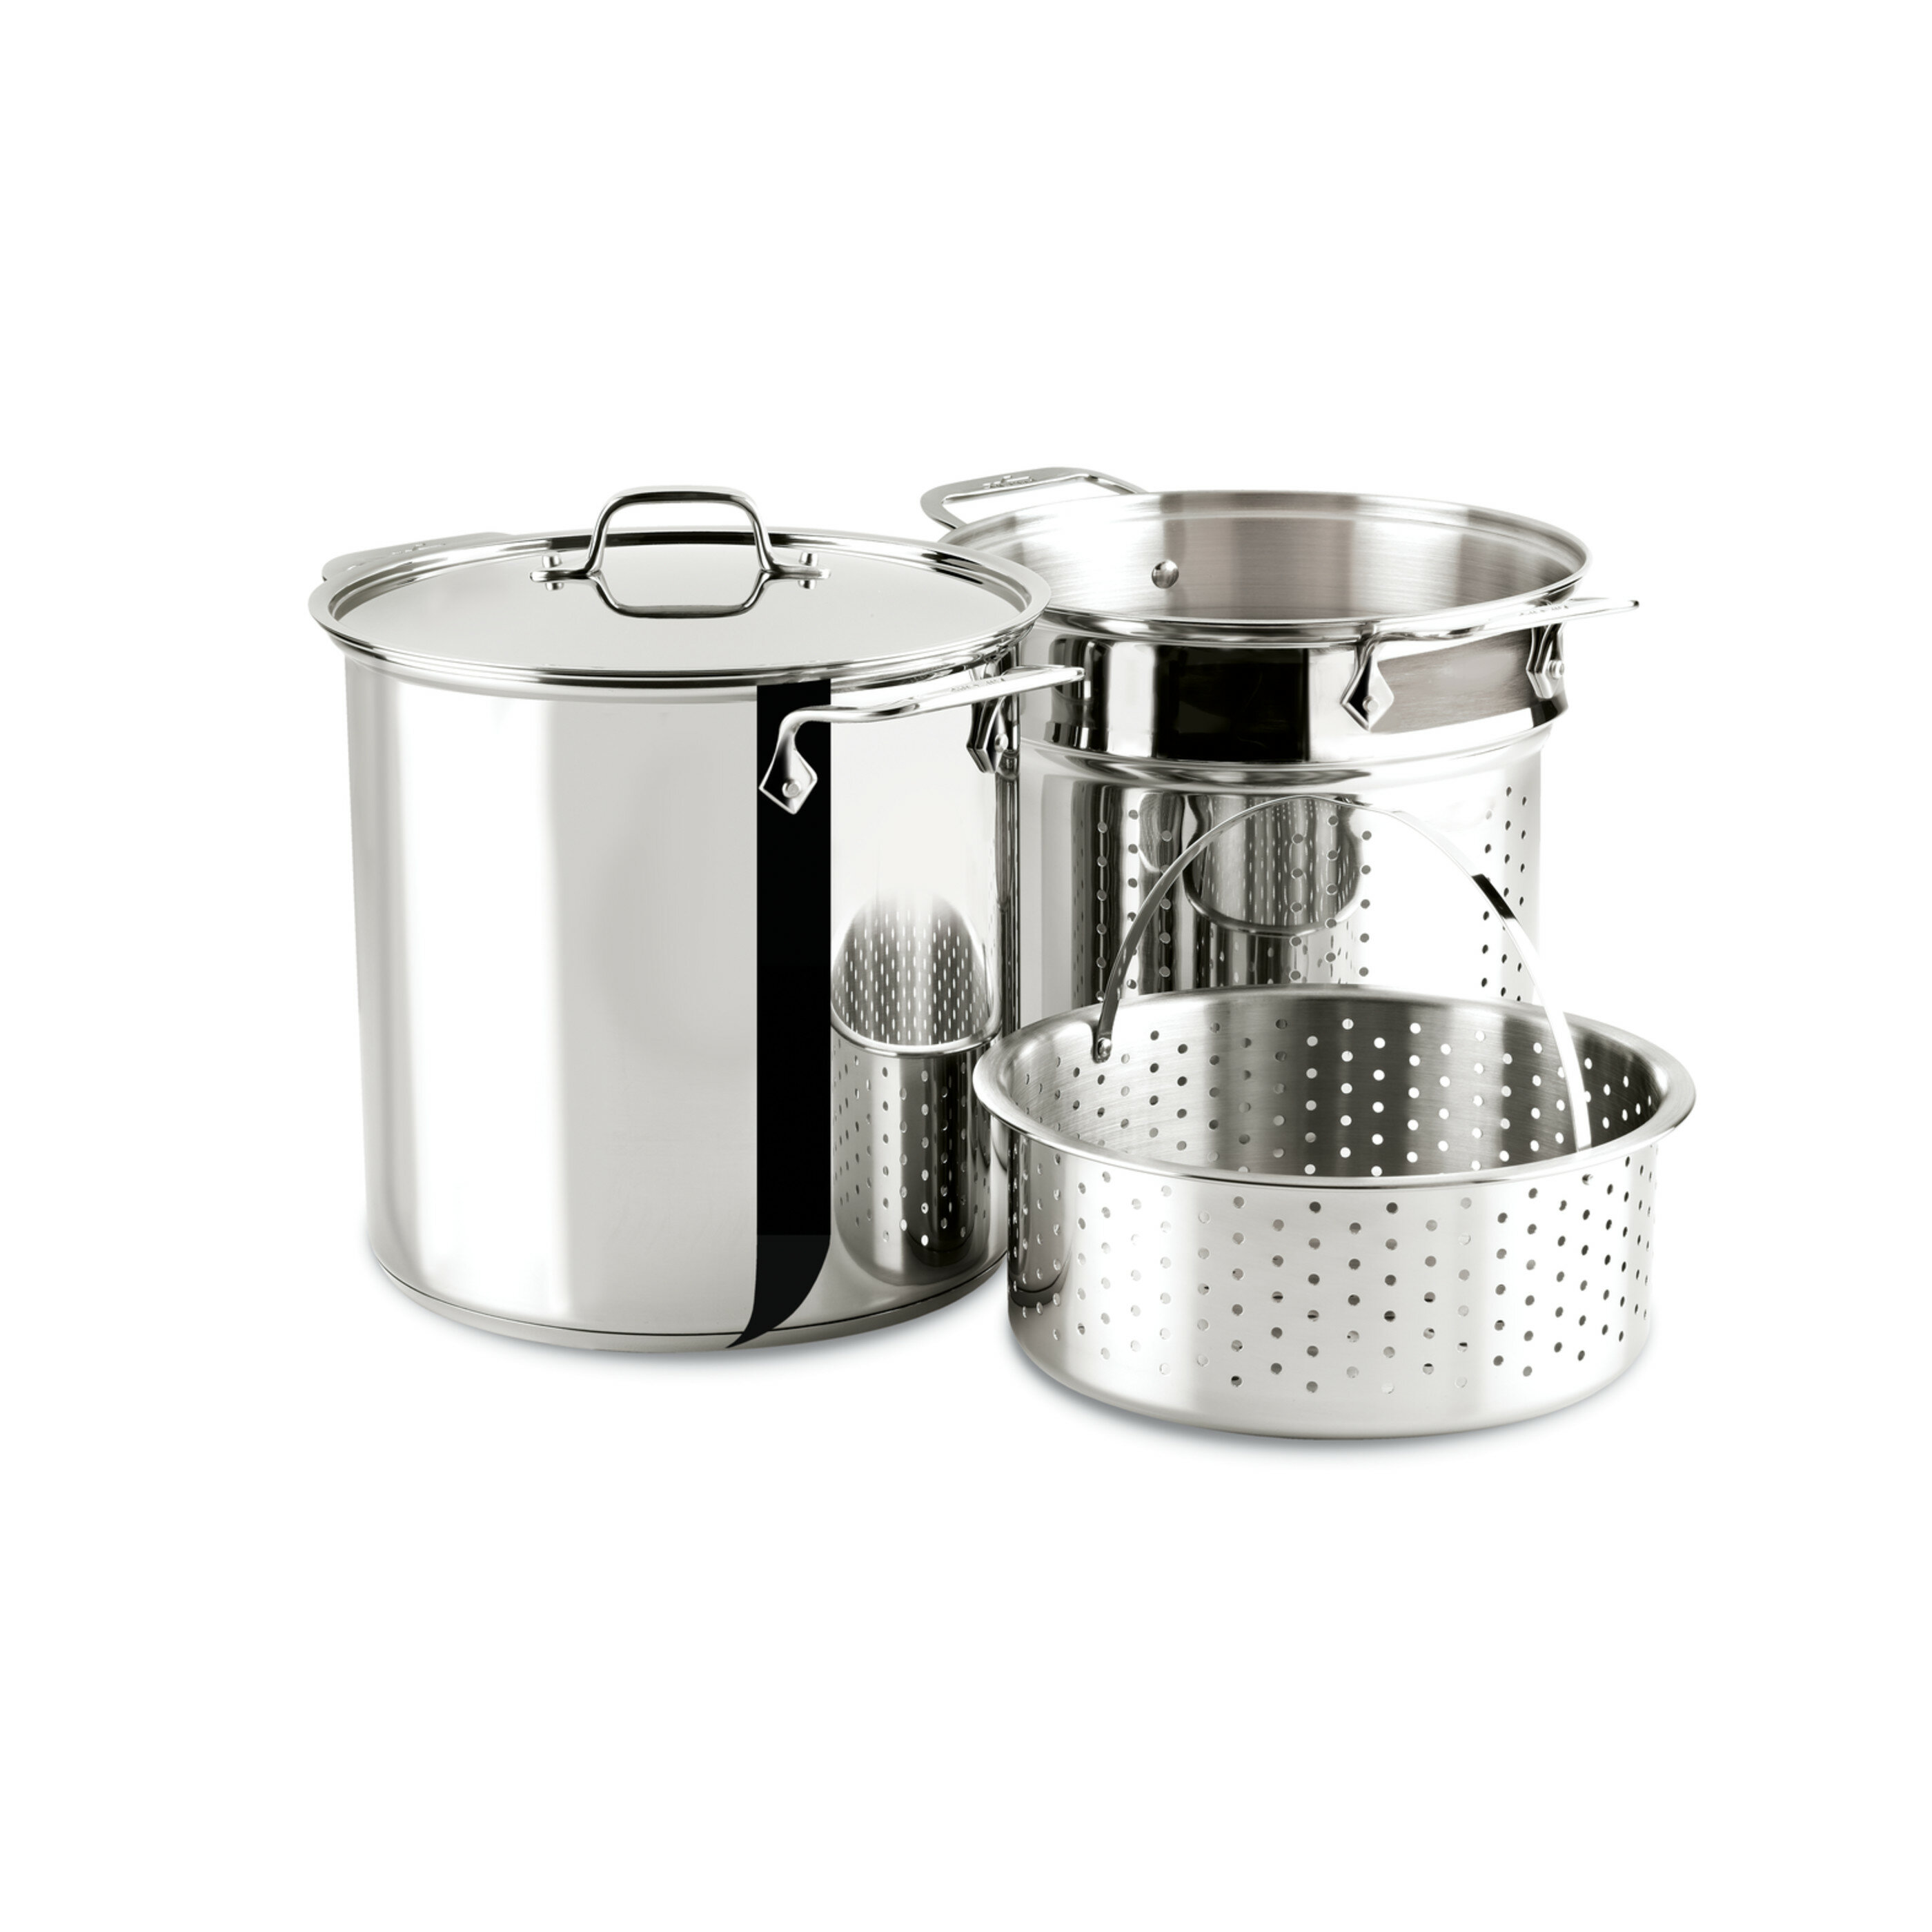 All-Clad D5 Brushed Stainless Steel 10 Piece Cookware Set with Free 4 Piece Lasagna Set